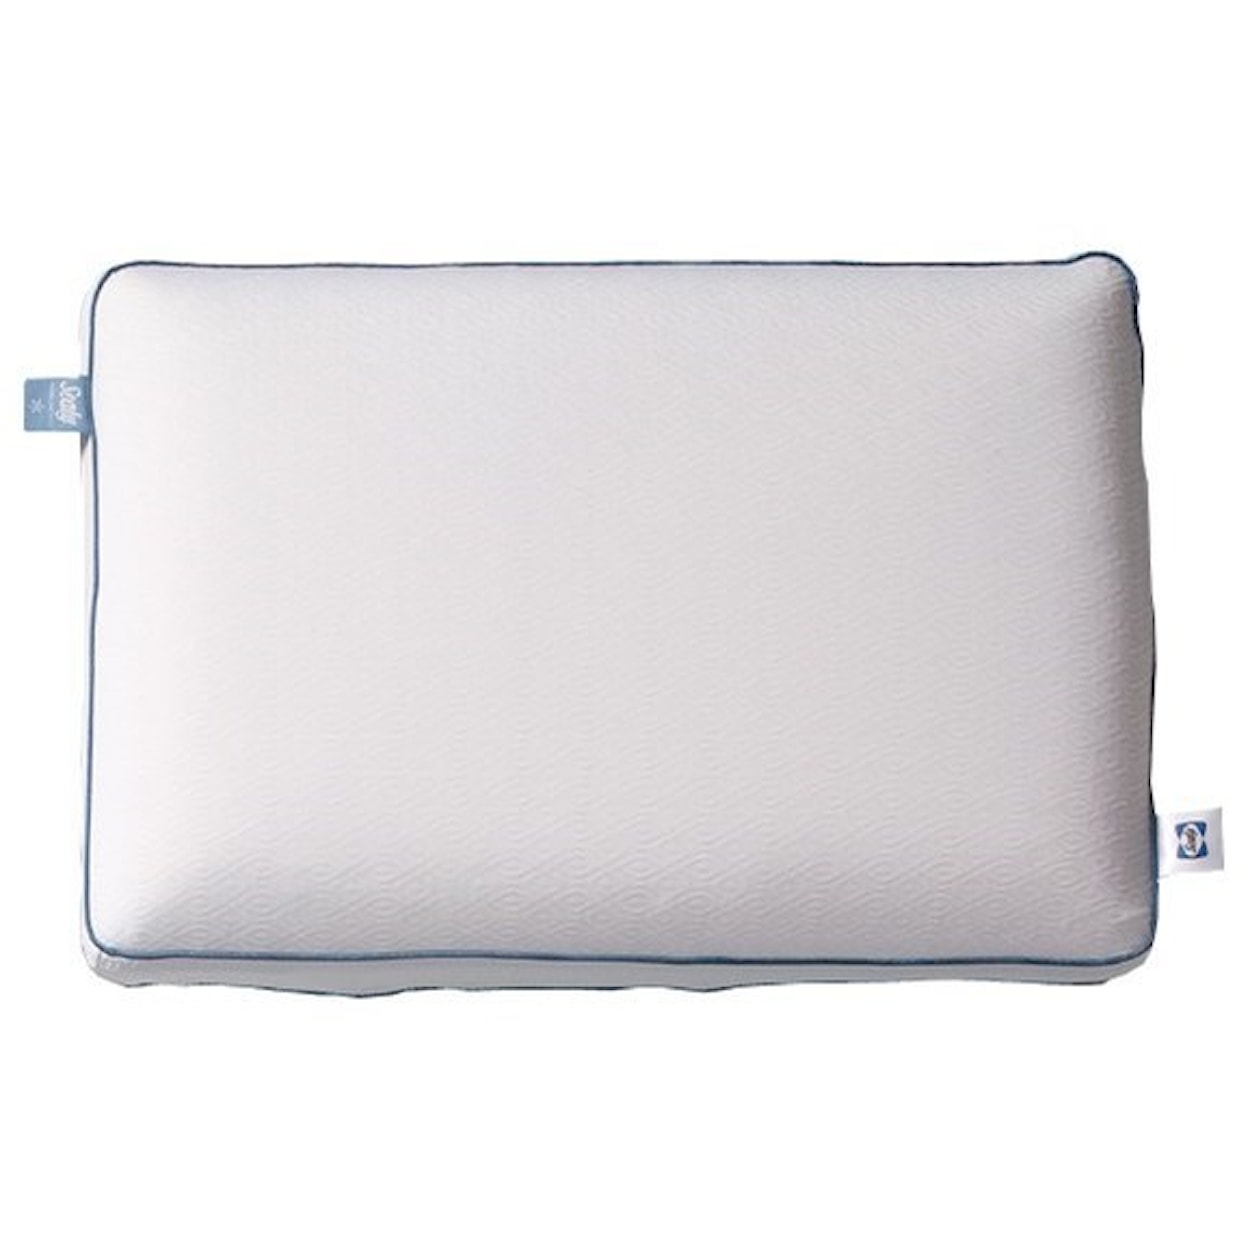 Sealy Sealy Response Pillow Response Cooling Memory Foam Bed Pillow